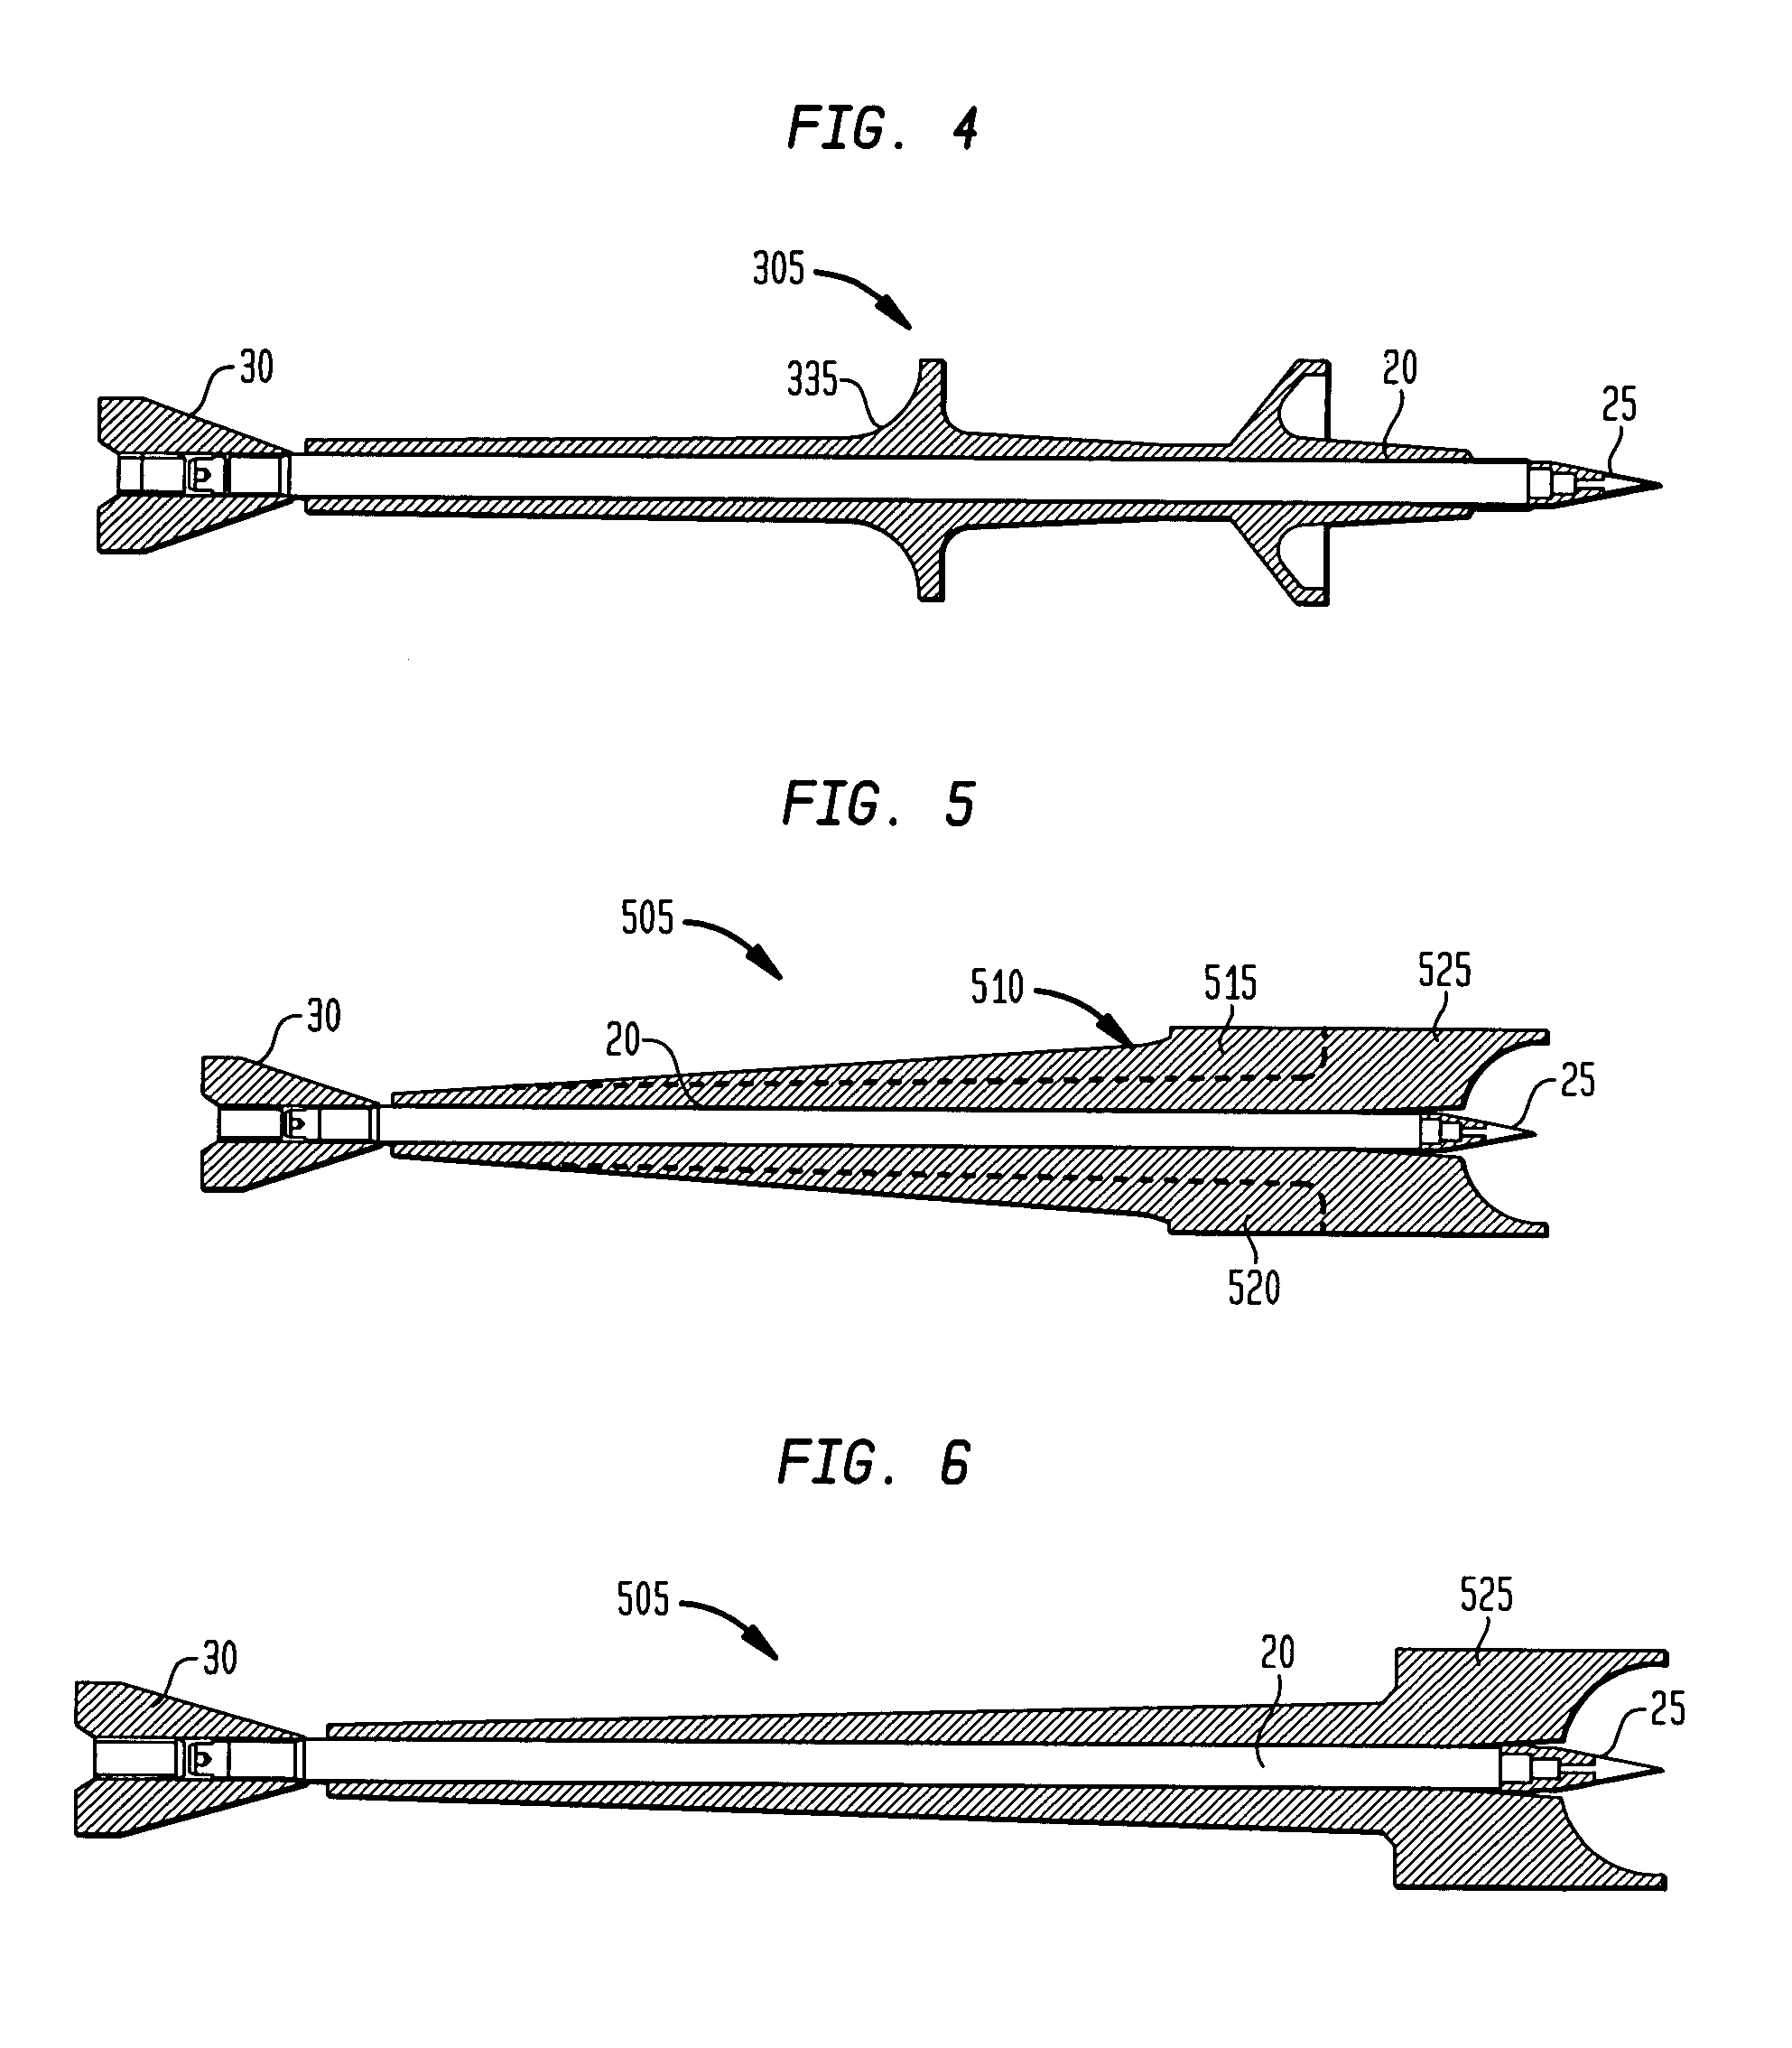 Sabot for reducing the parasitic weight of a kinetic energy projectile